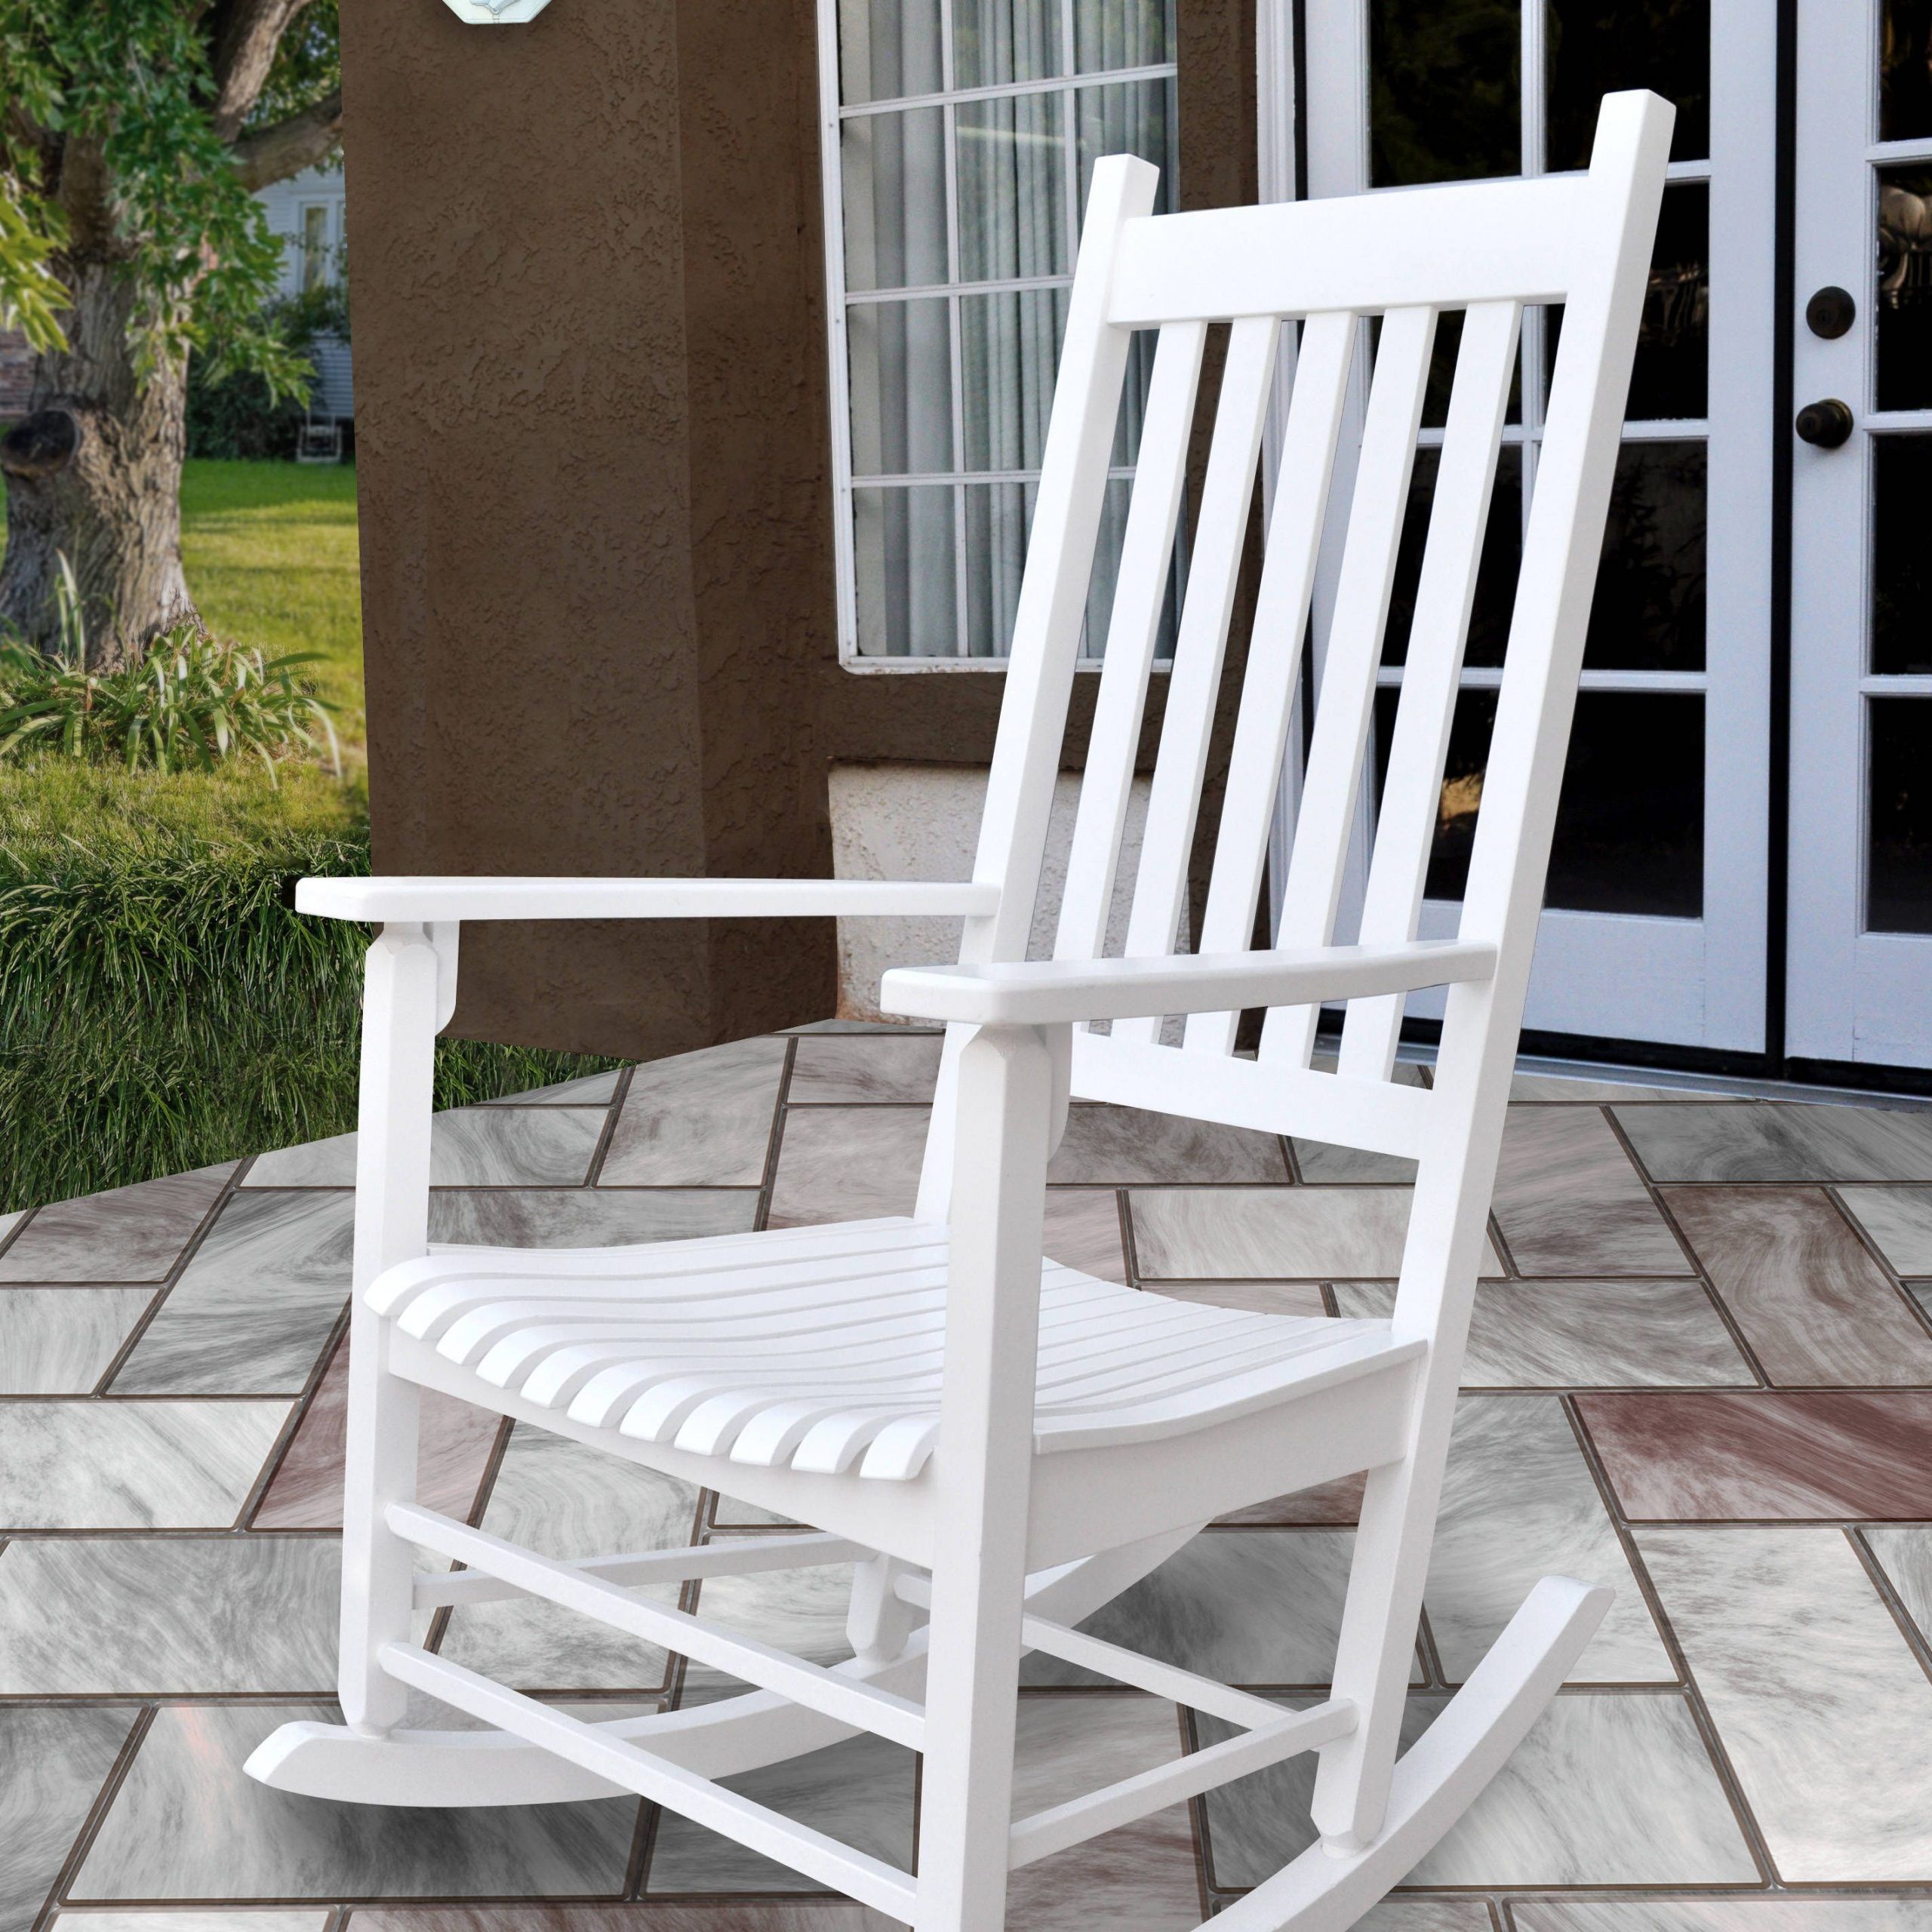 Shine Vermont White Solid Wood Porch Rocker | Porch Rocker, Patio With White Wood Soutdoor Seating Sets (View 4 of 15)